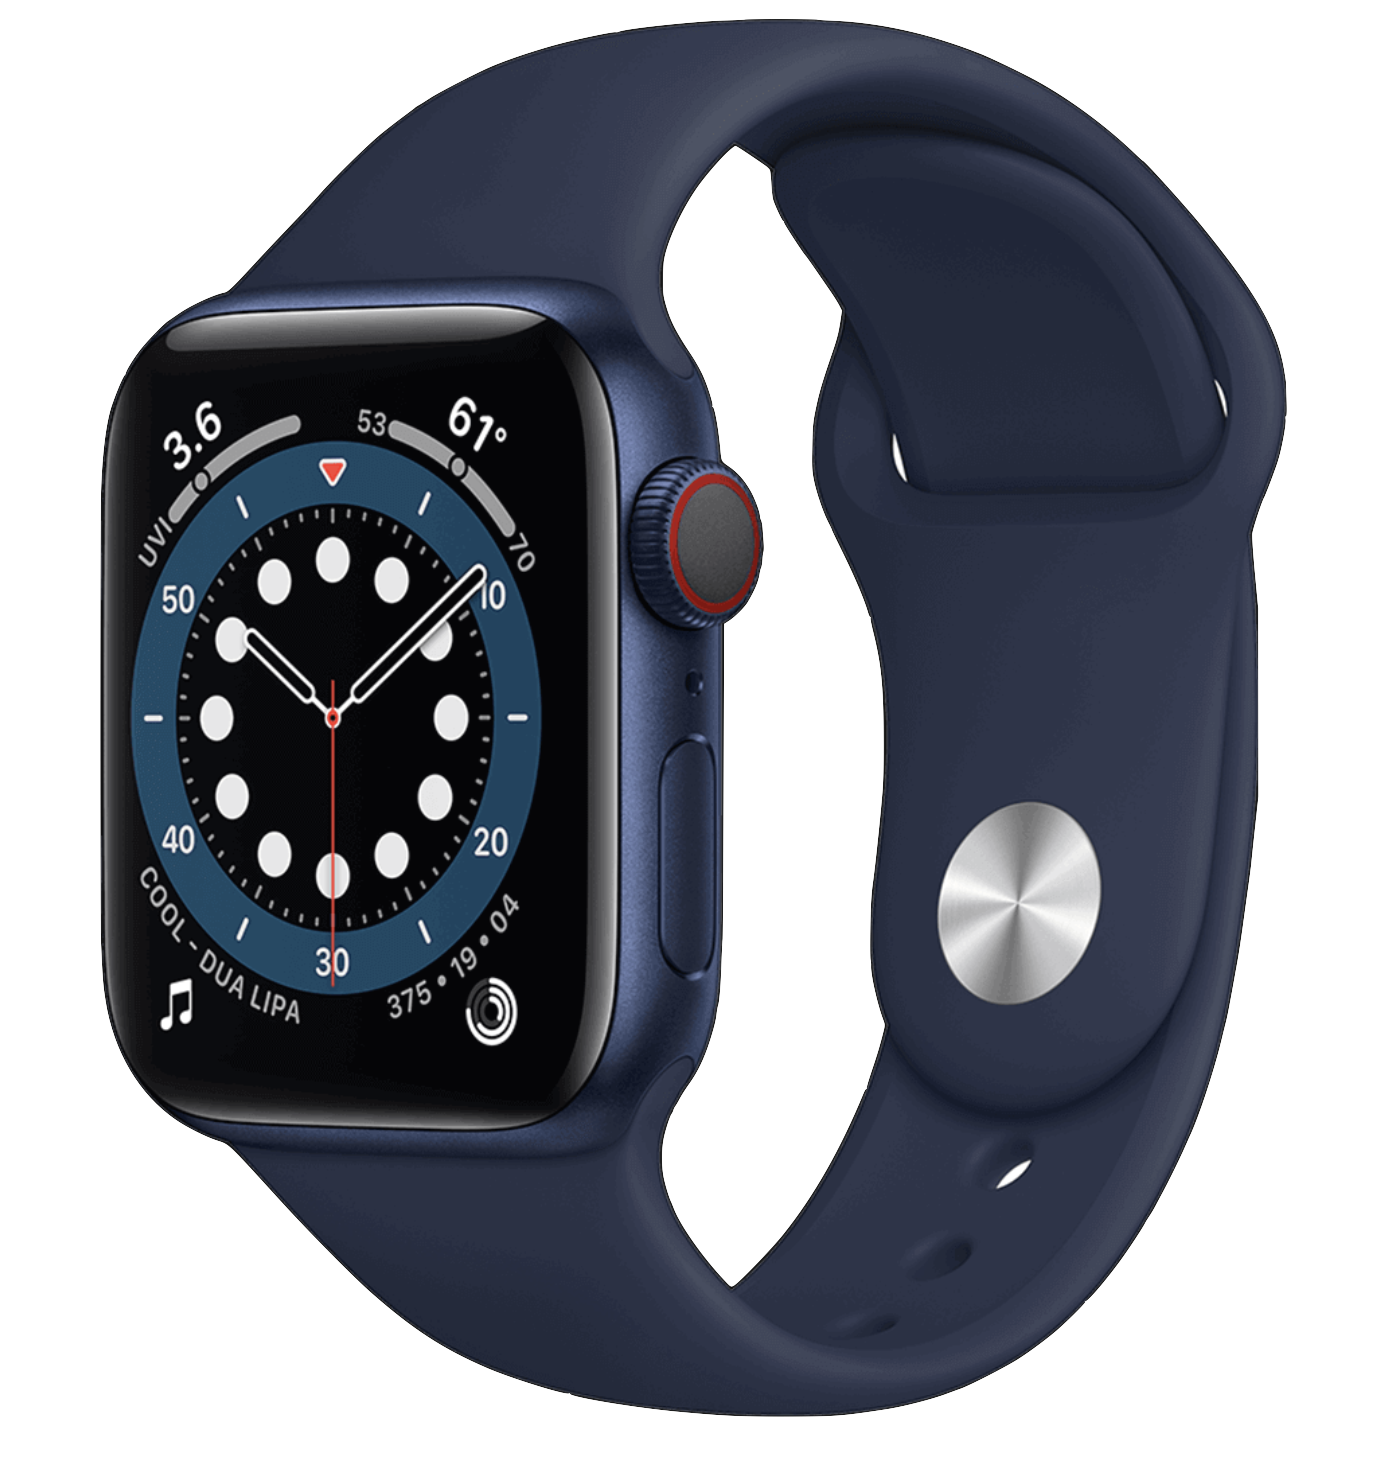 sell-my-apple-watch-online-for-cash-trade-in-apple-watch